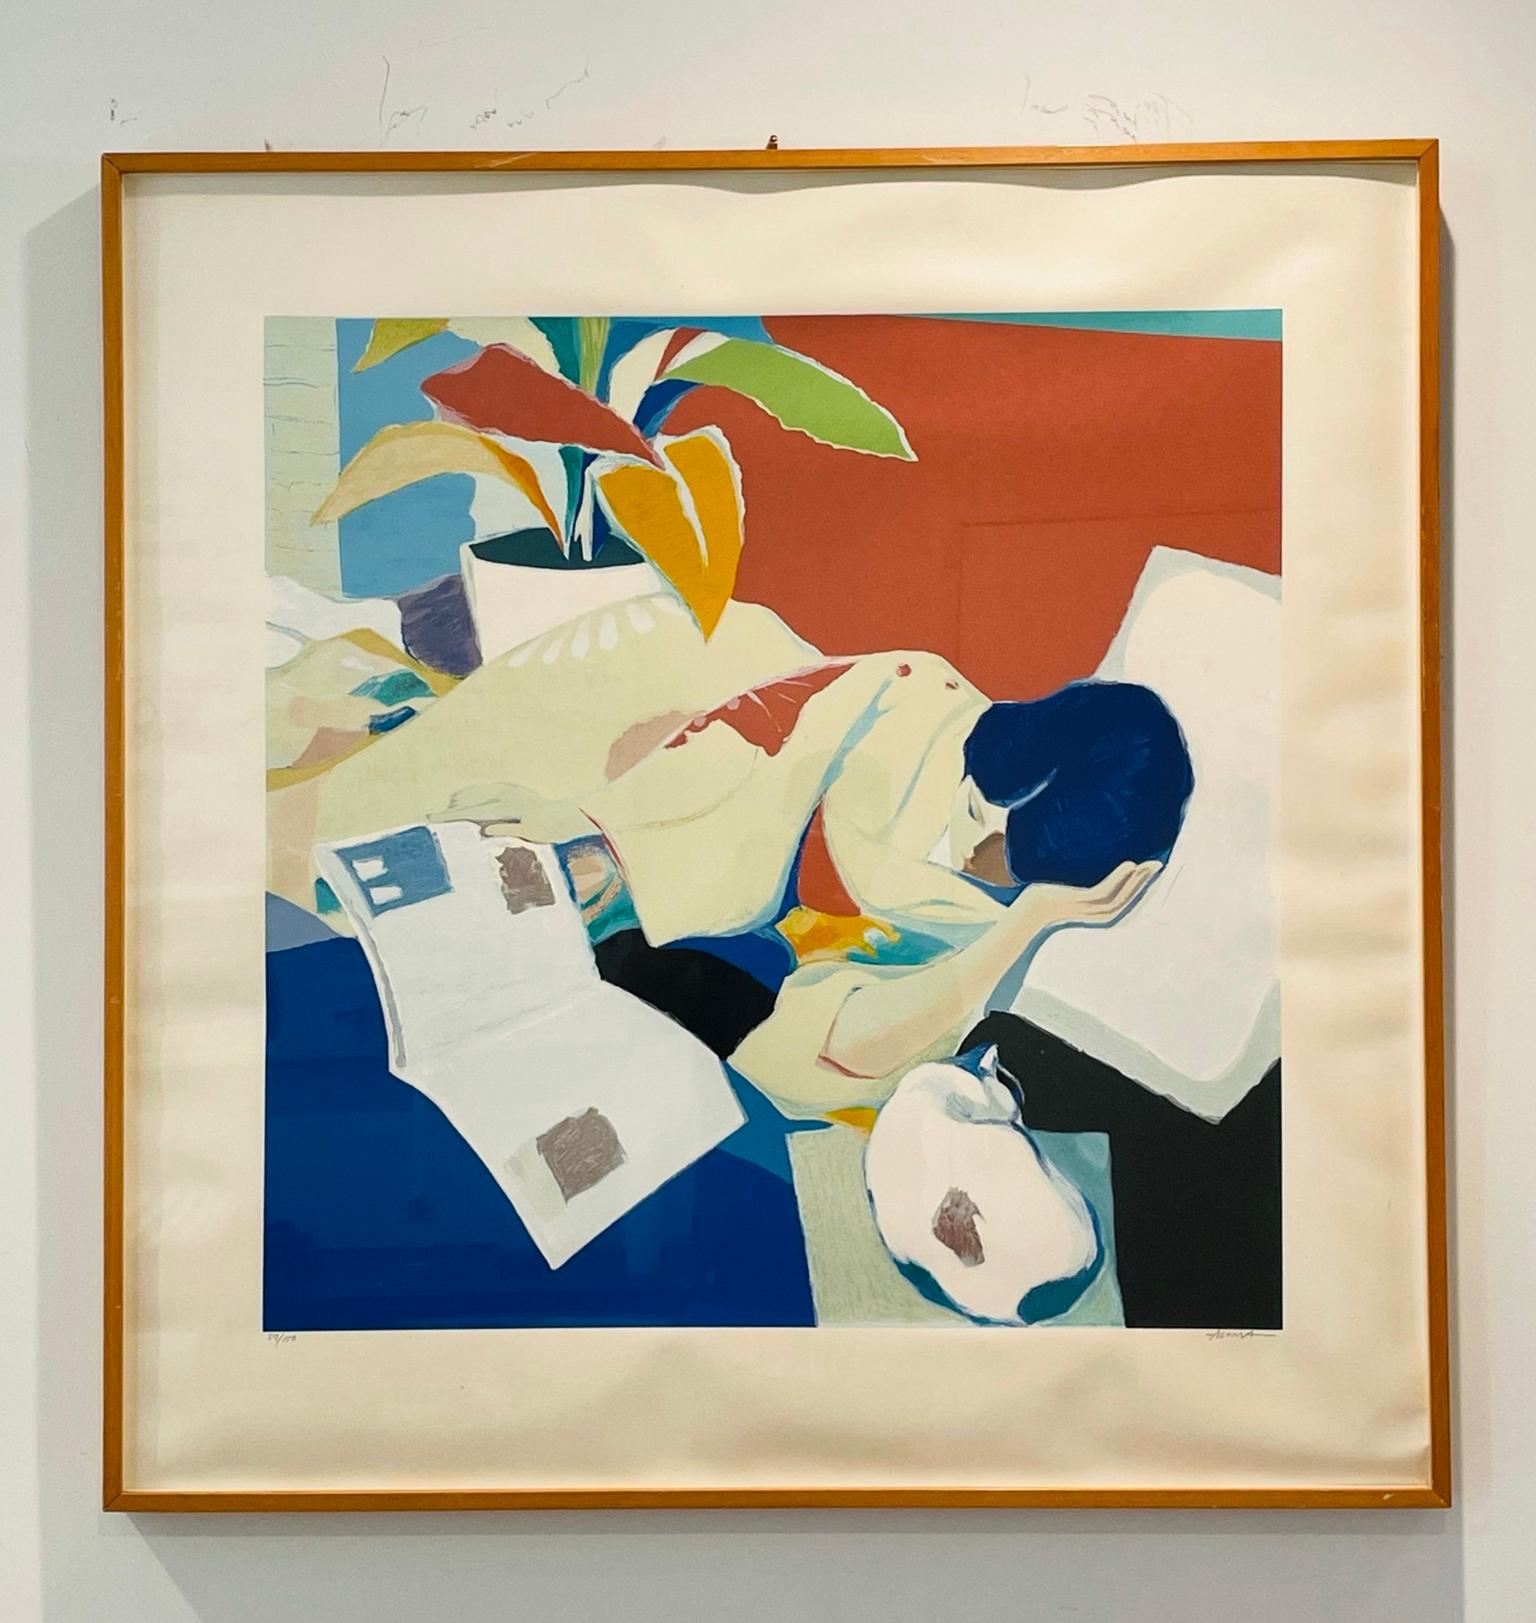 Limited edition lithograph by Japanese artist Tadashi Asoma, signed and numbered 57 of an edition of 150.

The piece depicts a female reading on her bed with a cat seating next to her, lots of color and attention to detail.

Measurements:
36.50